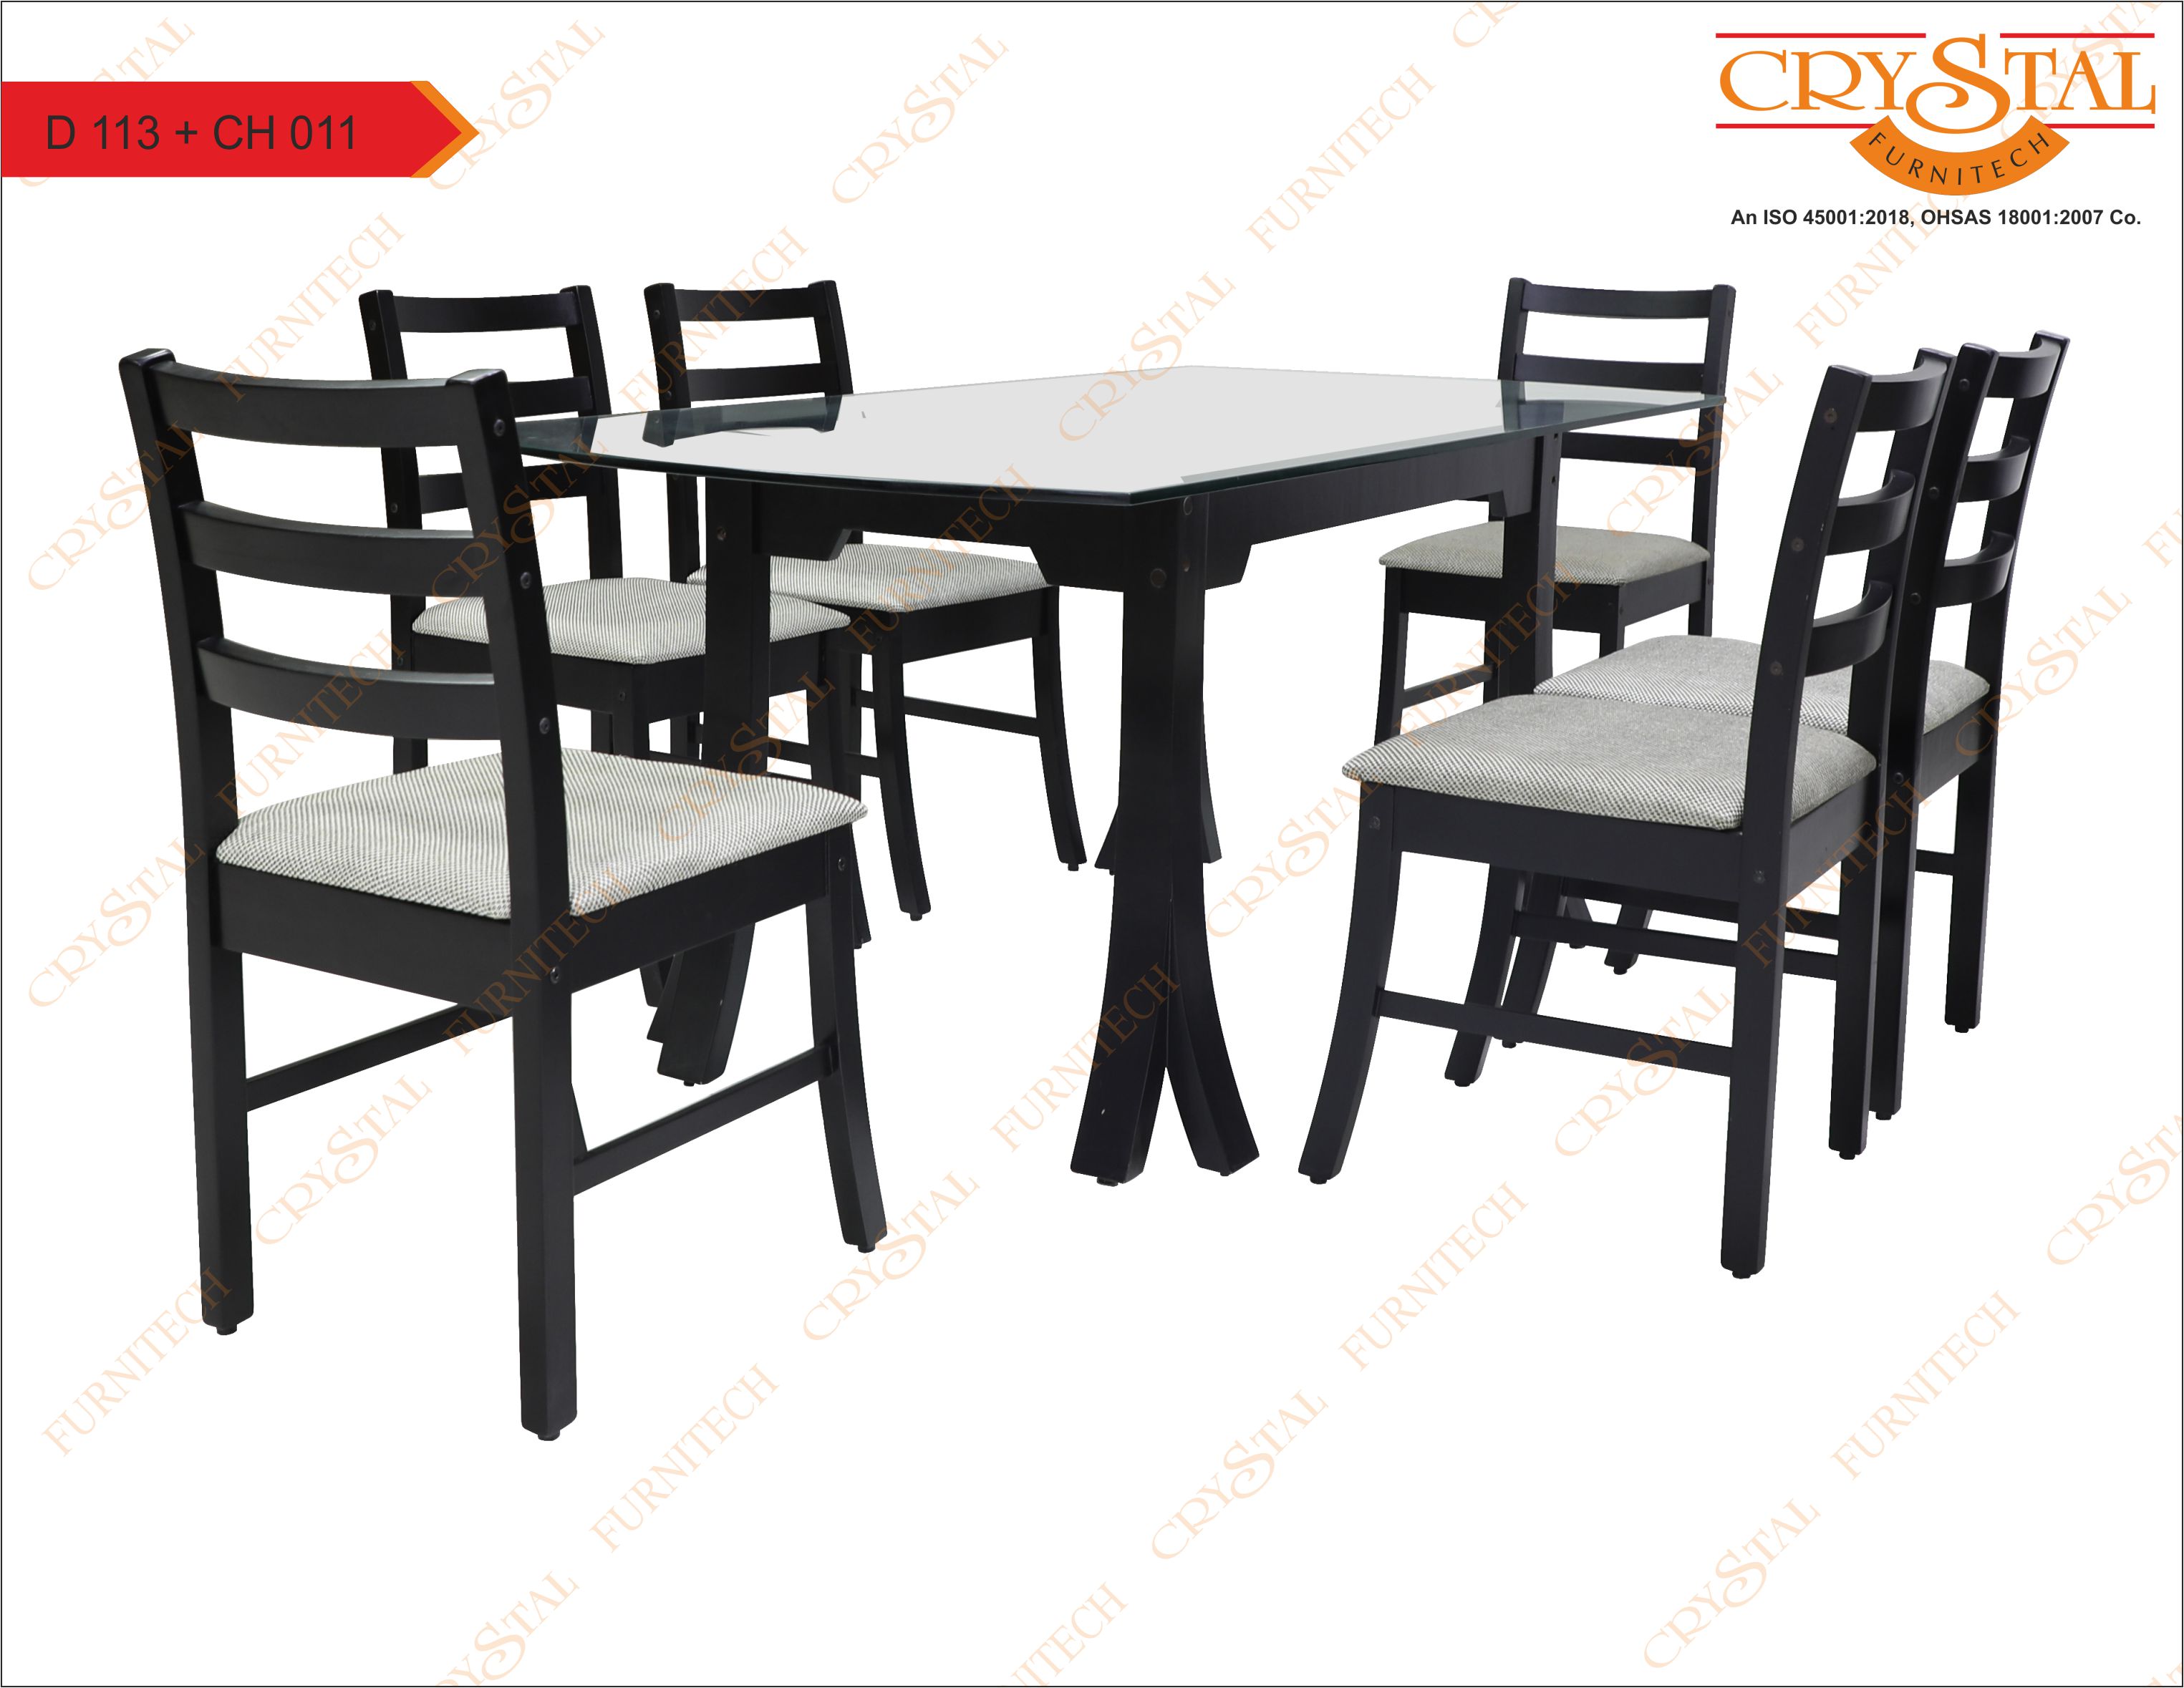 images/products/Dining-Set-Dining-Set-D-113+CH011_1657002154.jpg